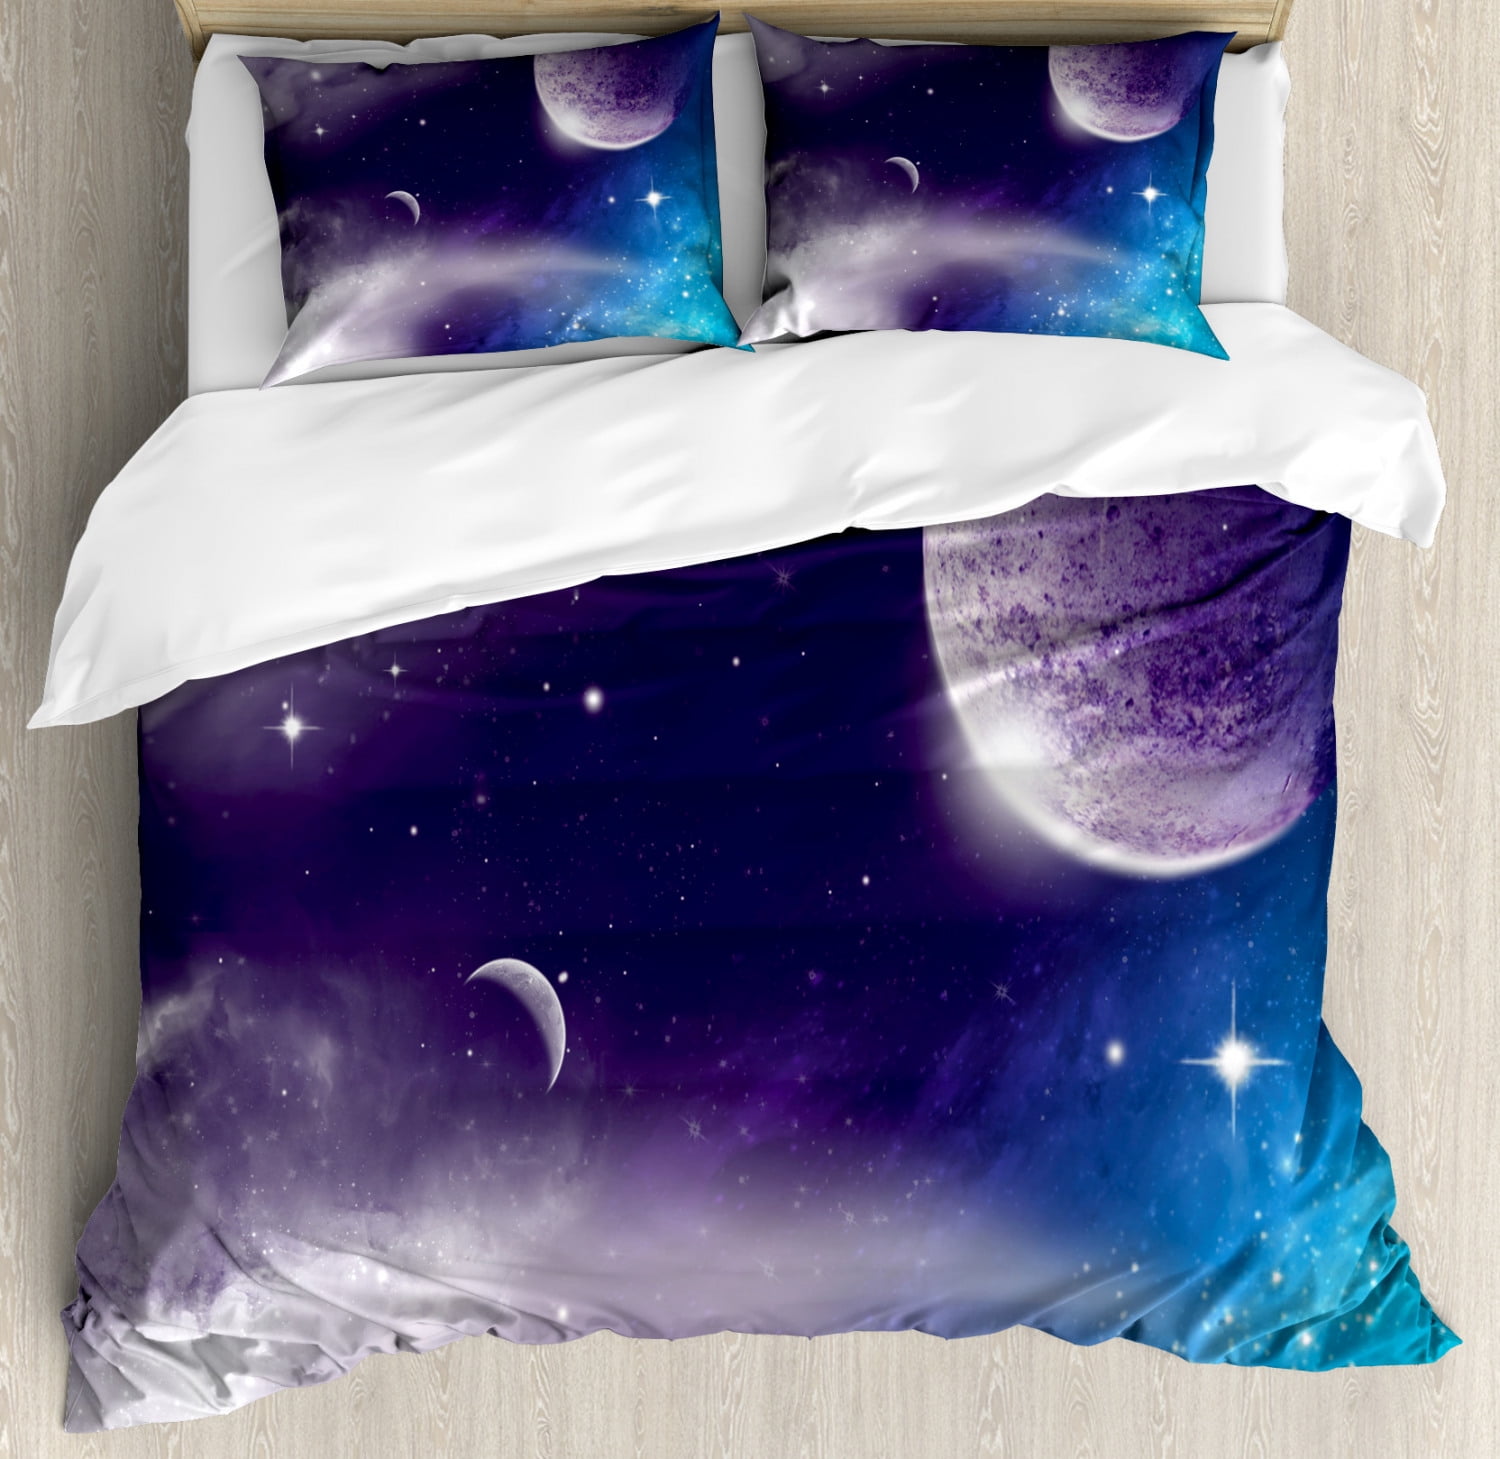 Space Duvet Cover Set King Size, Space Bedding King